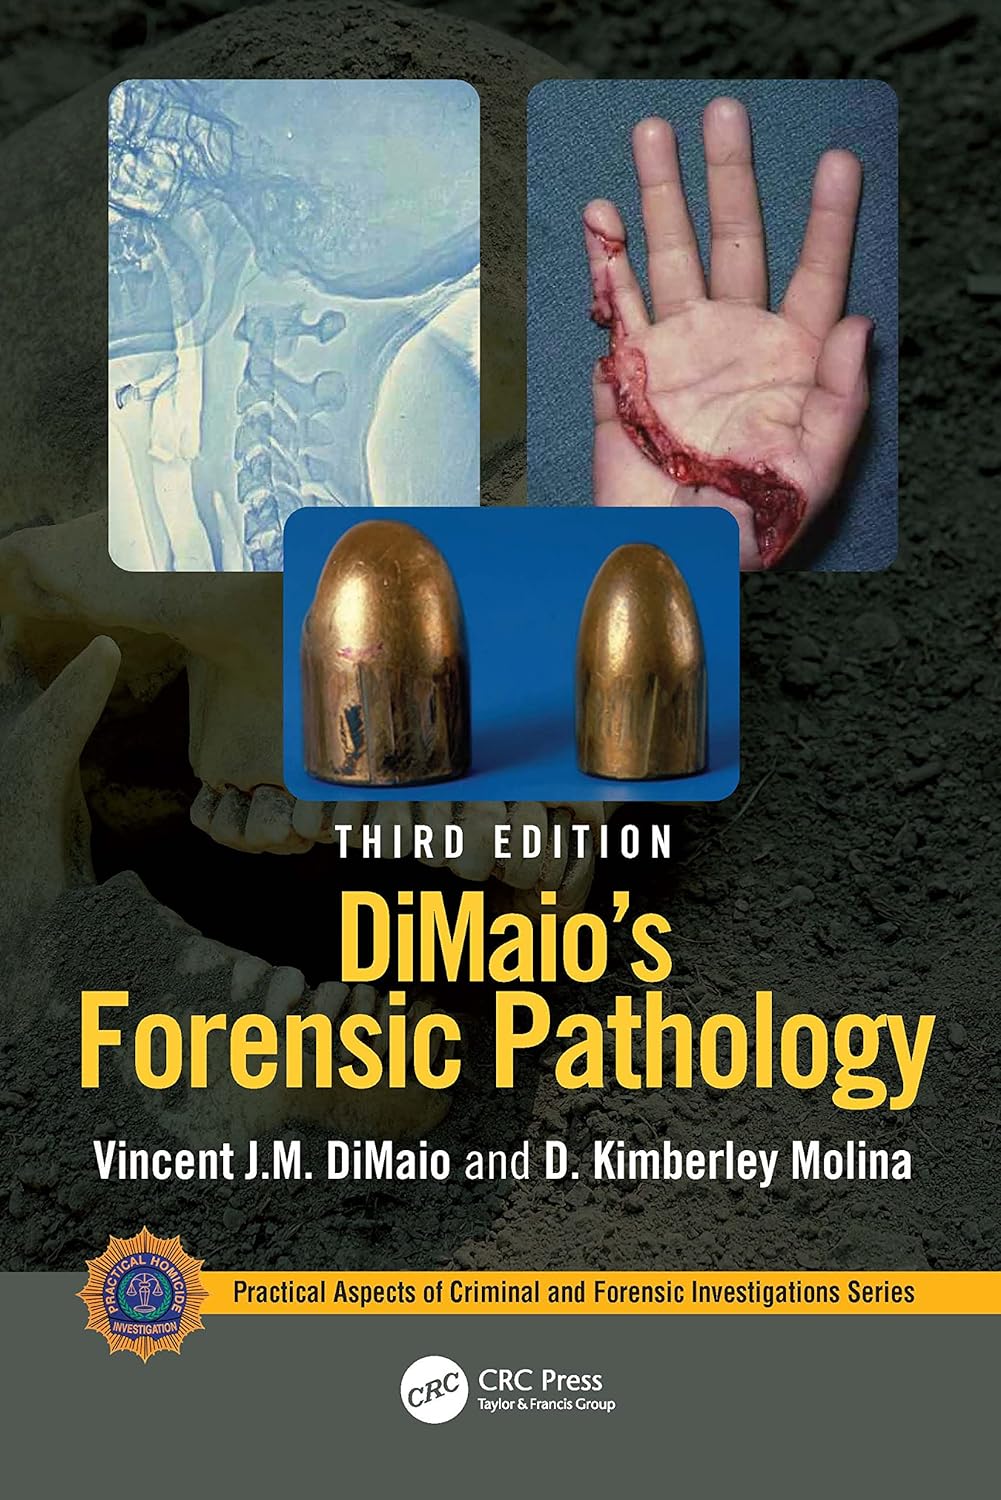 DiMaio's Forensic Pathology (Practical Aspects of Criminal and Forensic Investigations) 3rd Edition